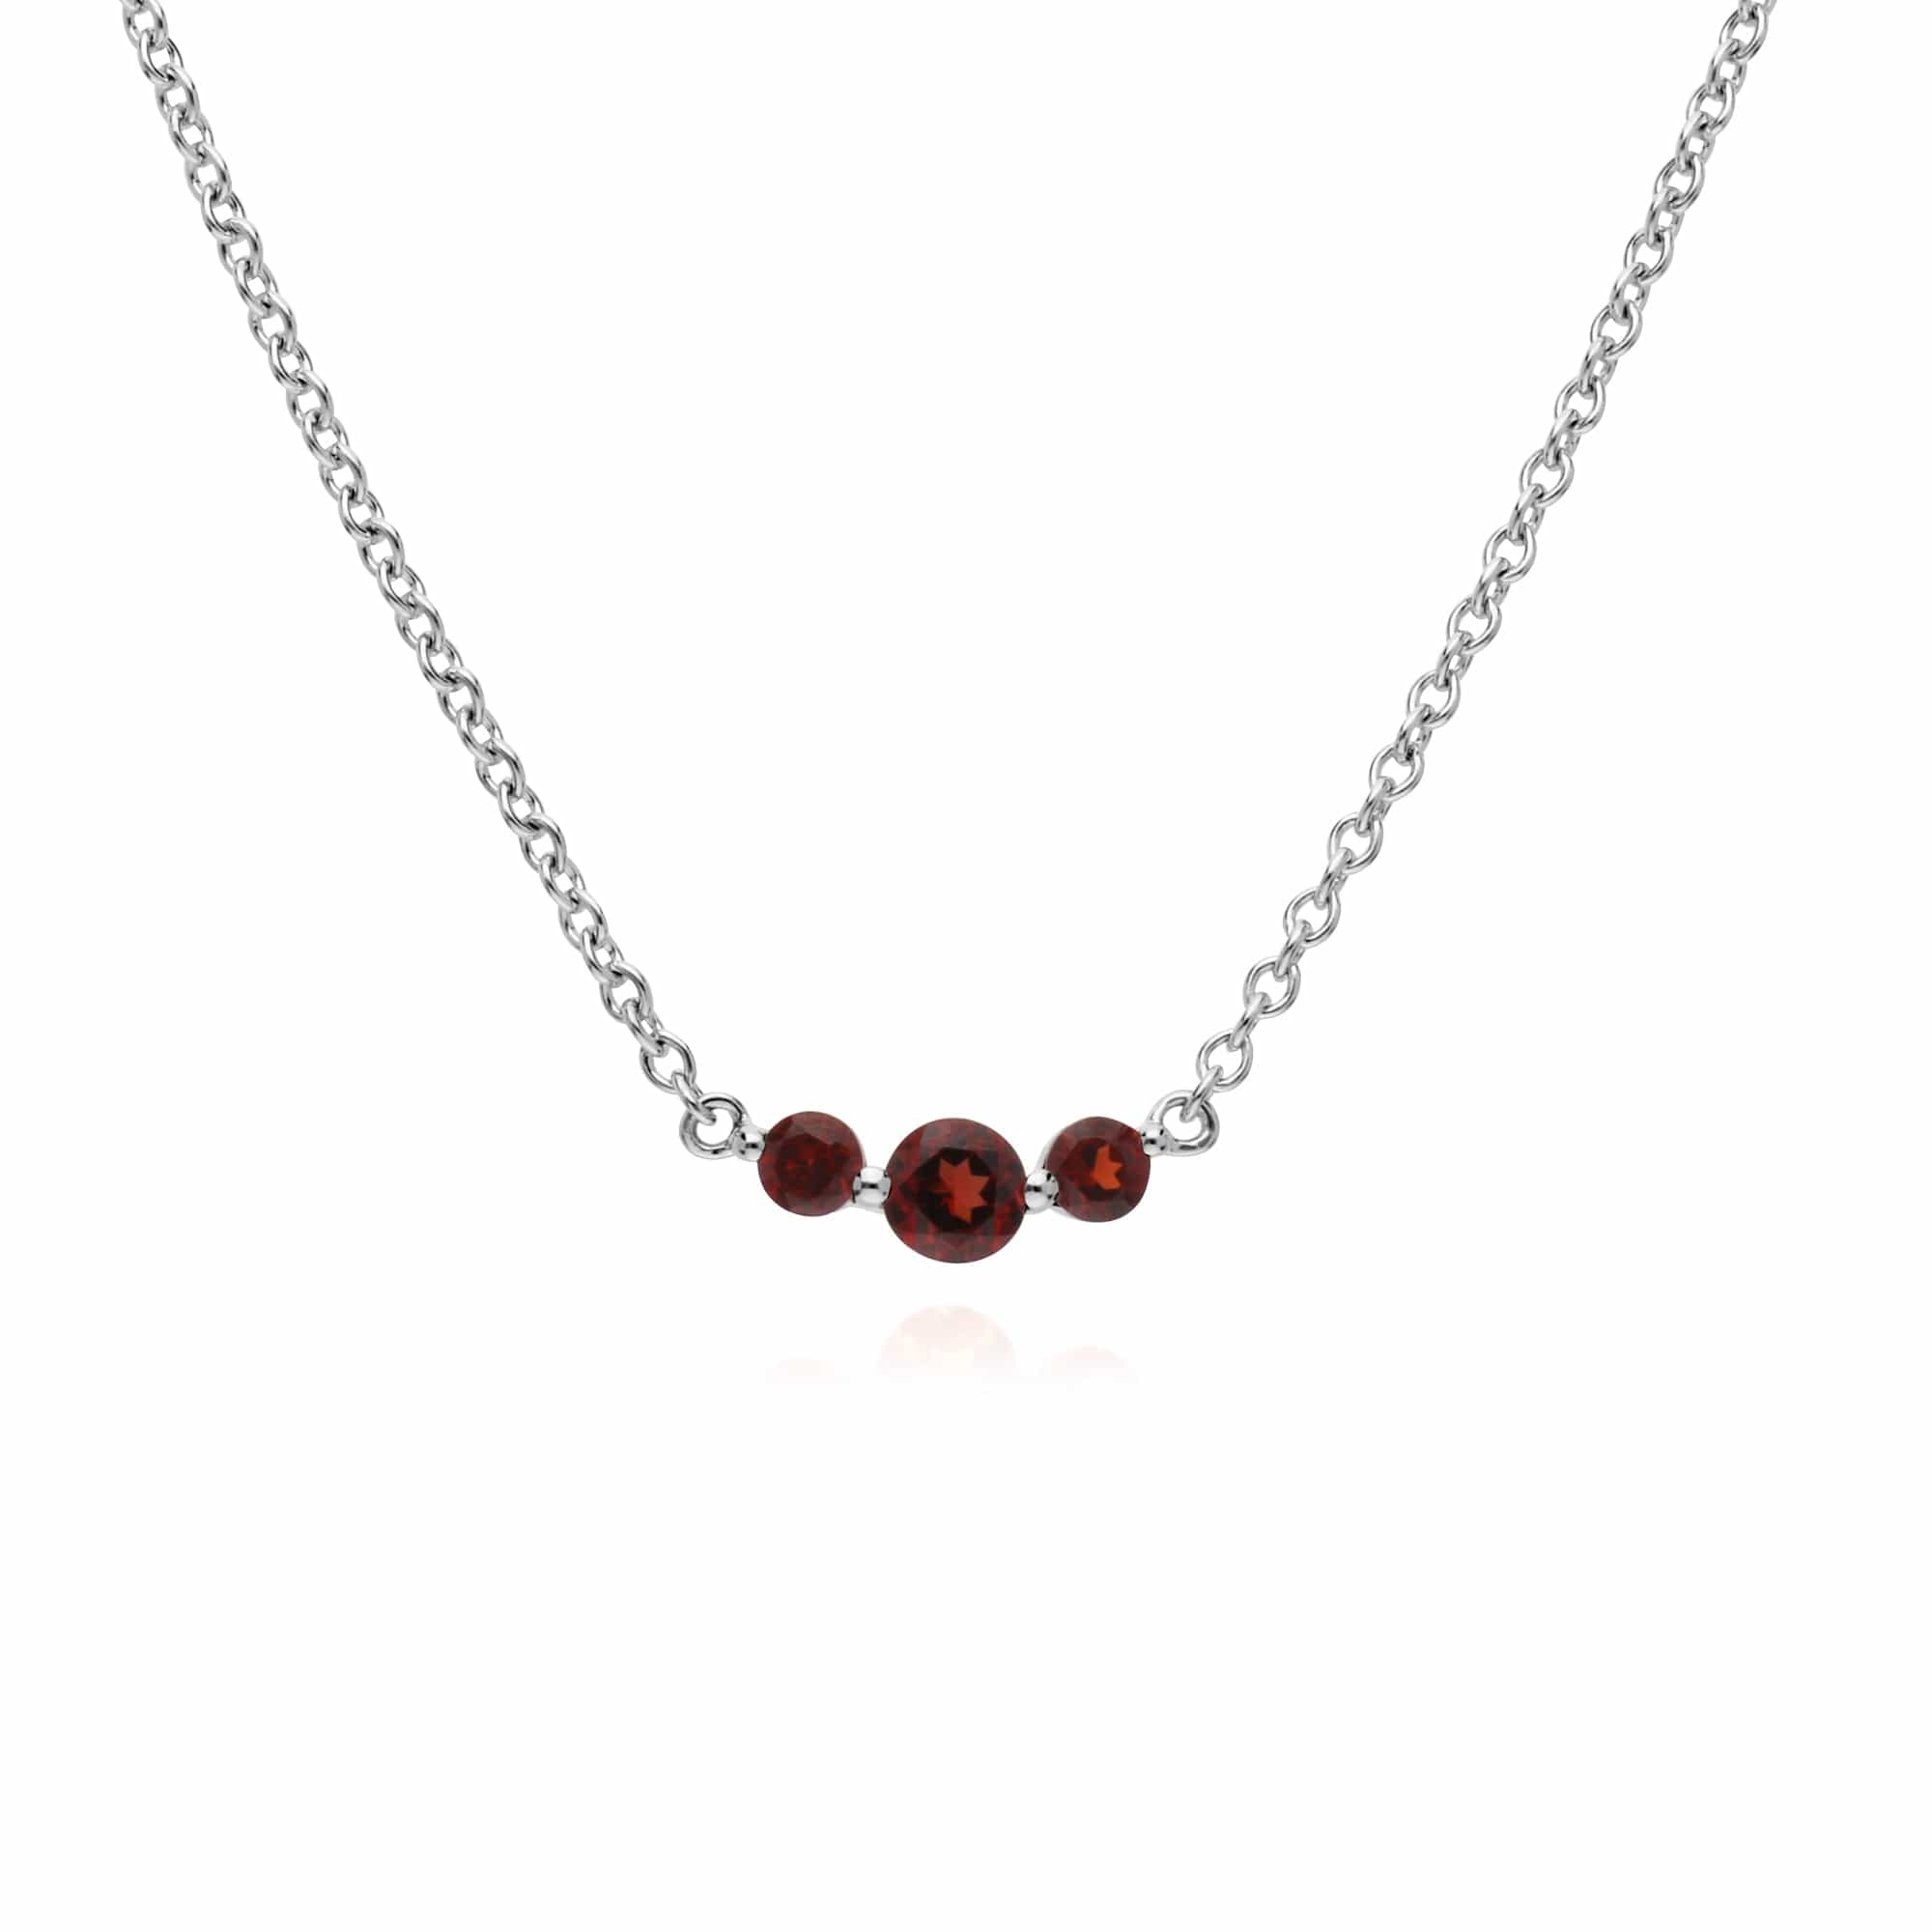 270E025502925-270N034202925 Classic Round Garnet Three Stone Gradient Earrings & Necklace Set in 925 Sterling Silver 3